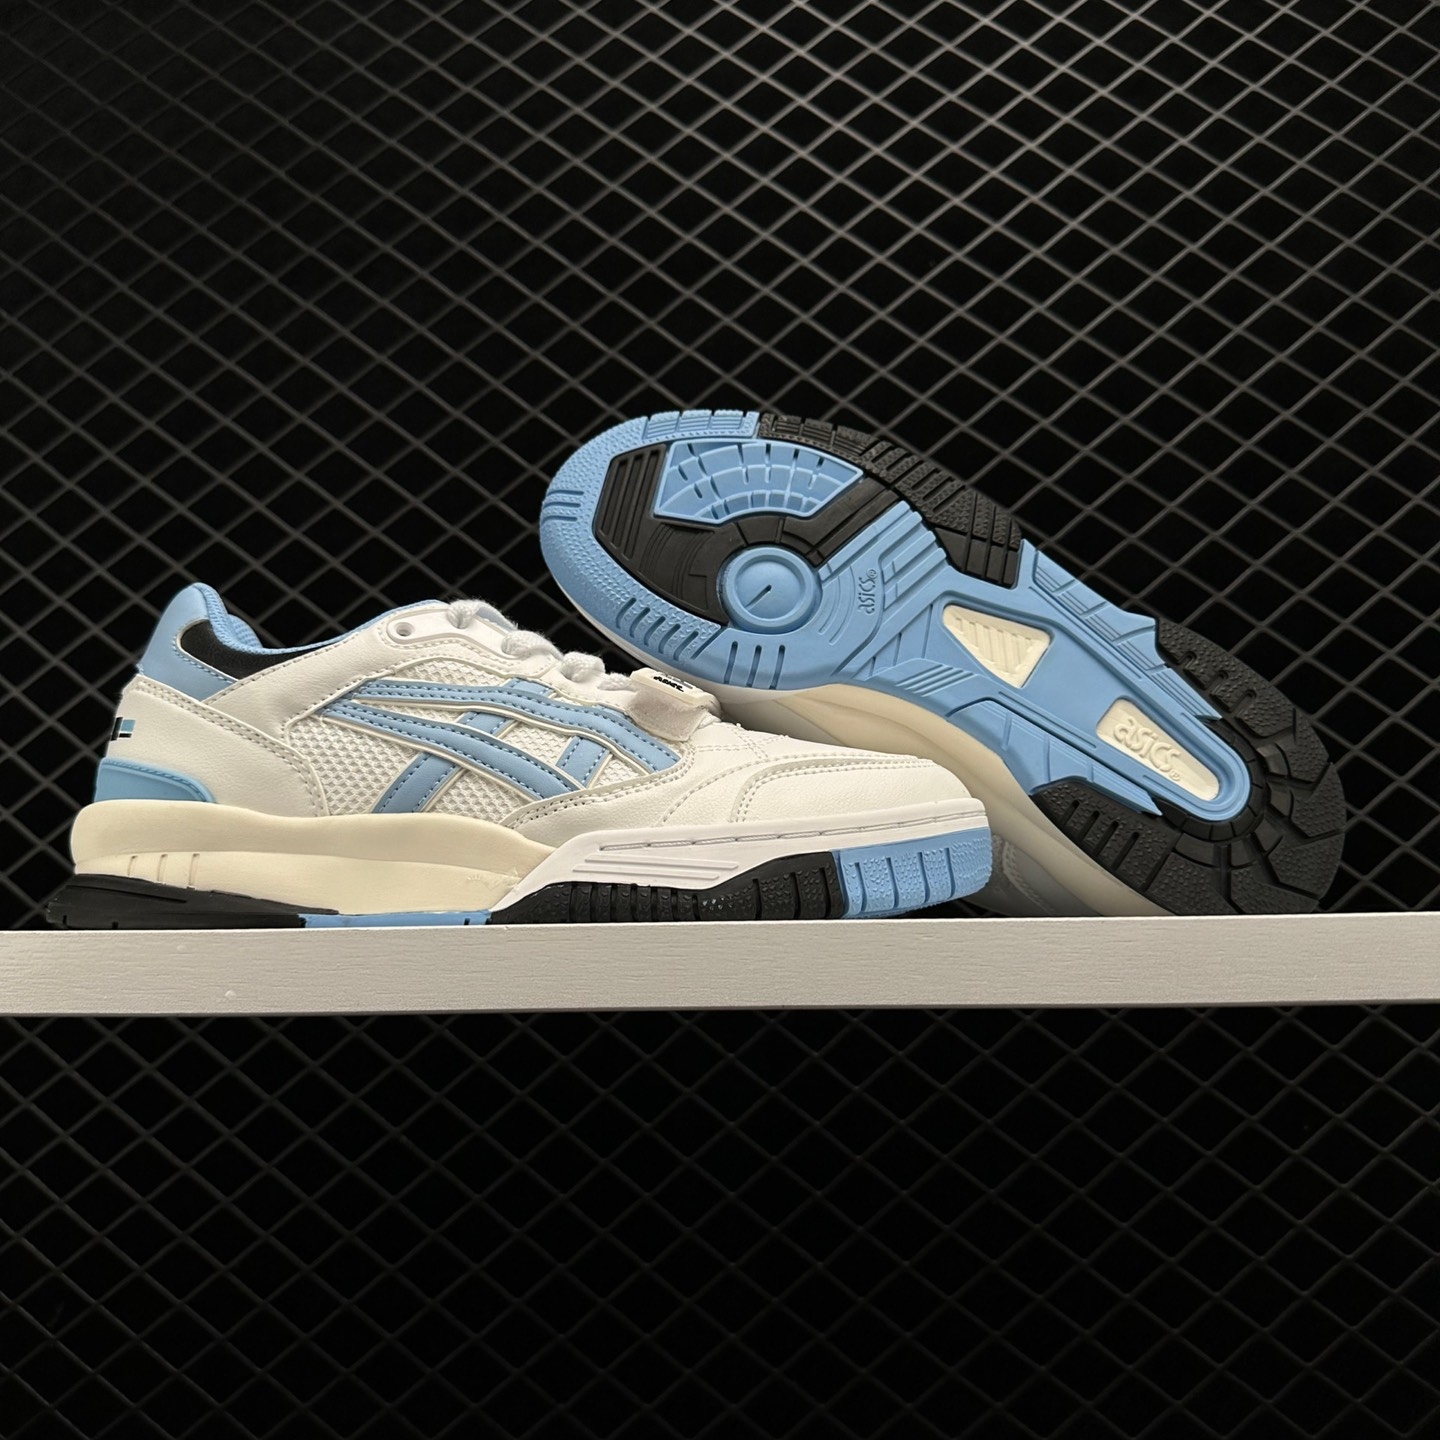 Asics Gel-Spotlyte Low V2 'White Blue' 1203A258-103 - Premium Sneakers for Athletic Performance